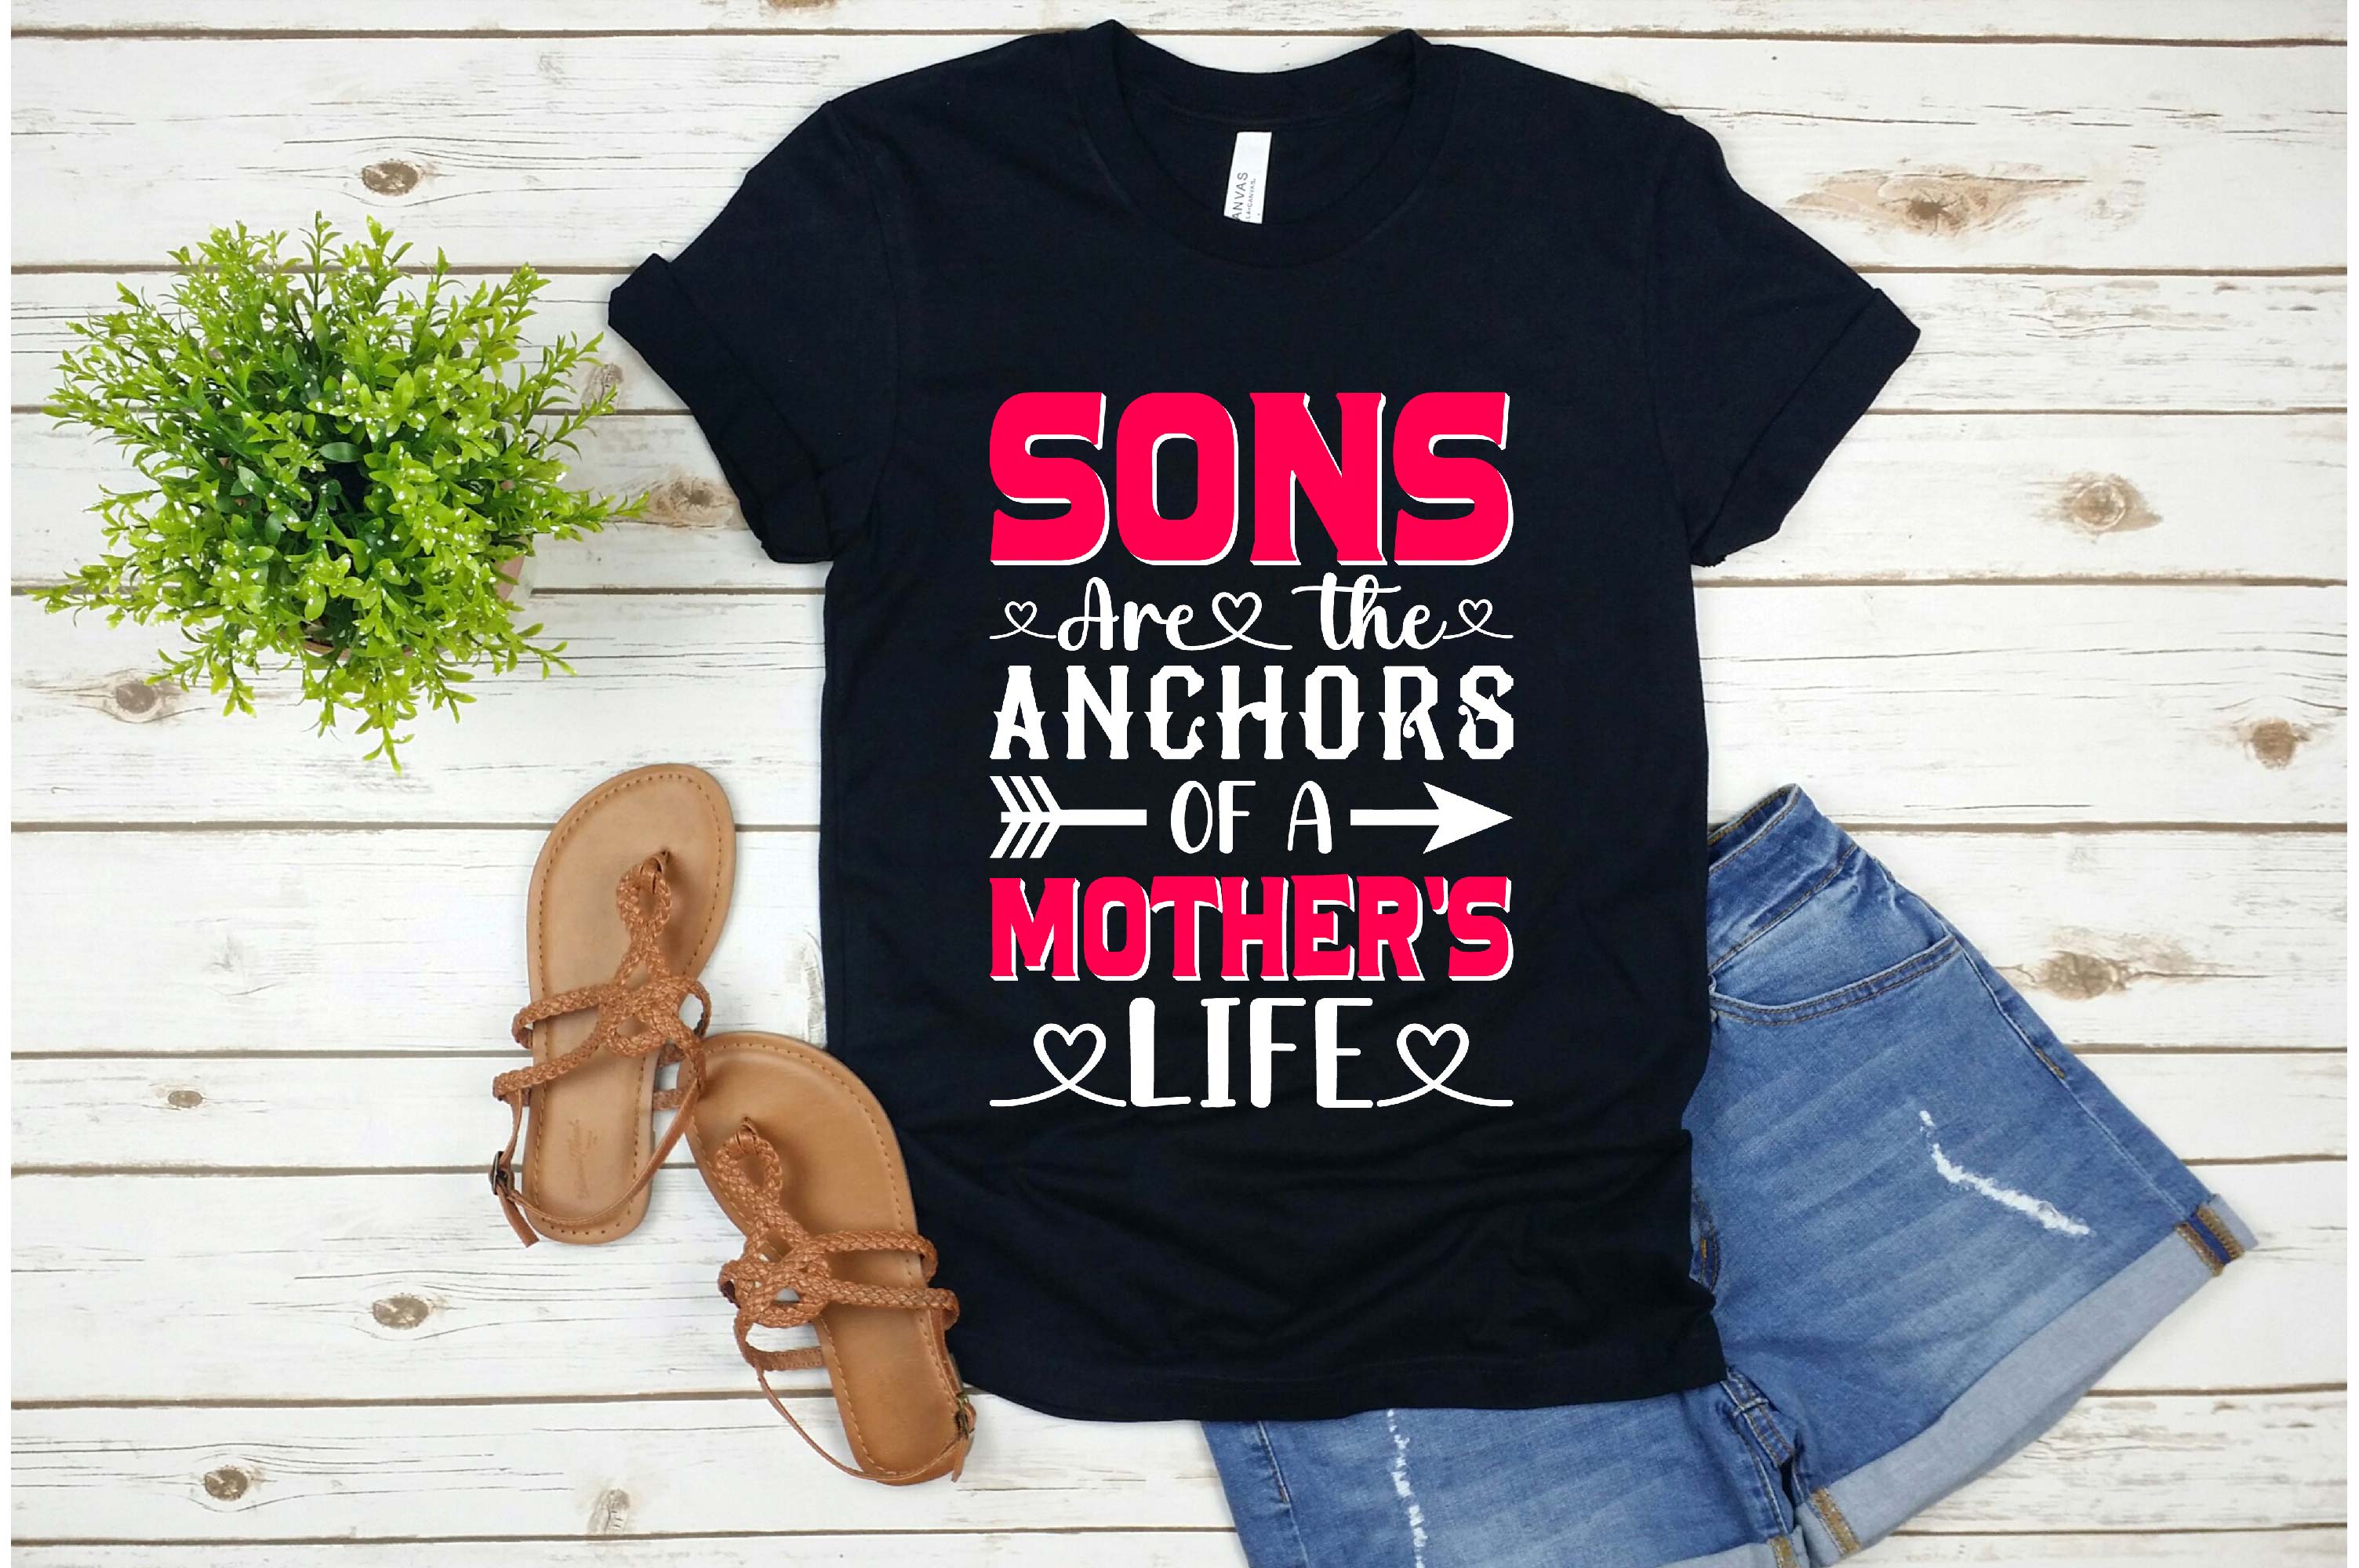 T - shirt that says sons are the anchors of a mother's life.